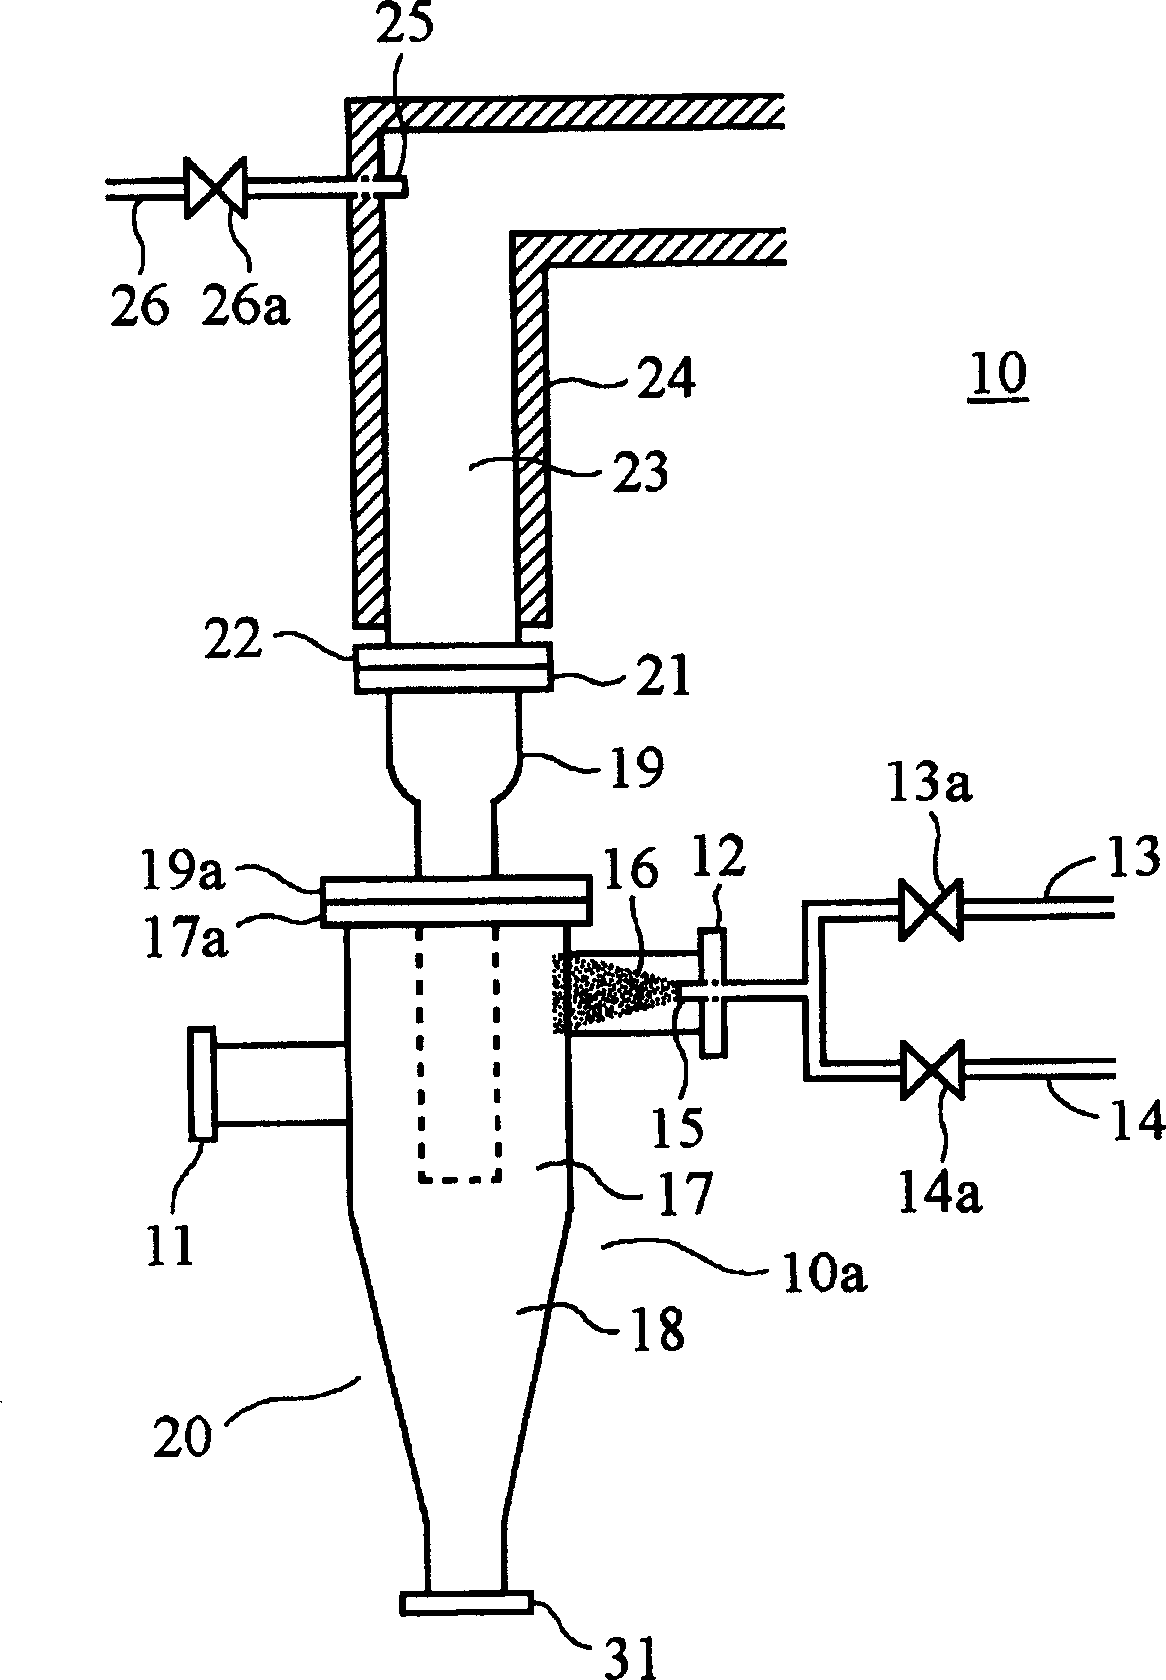 Device and method for pretreating waste gas under moisture environment